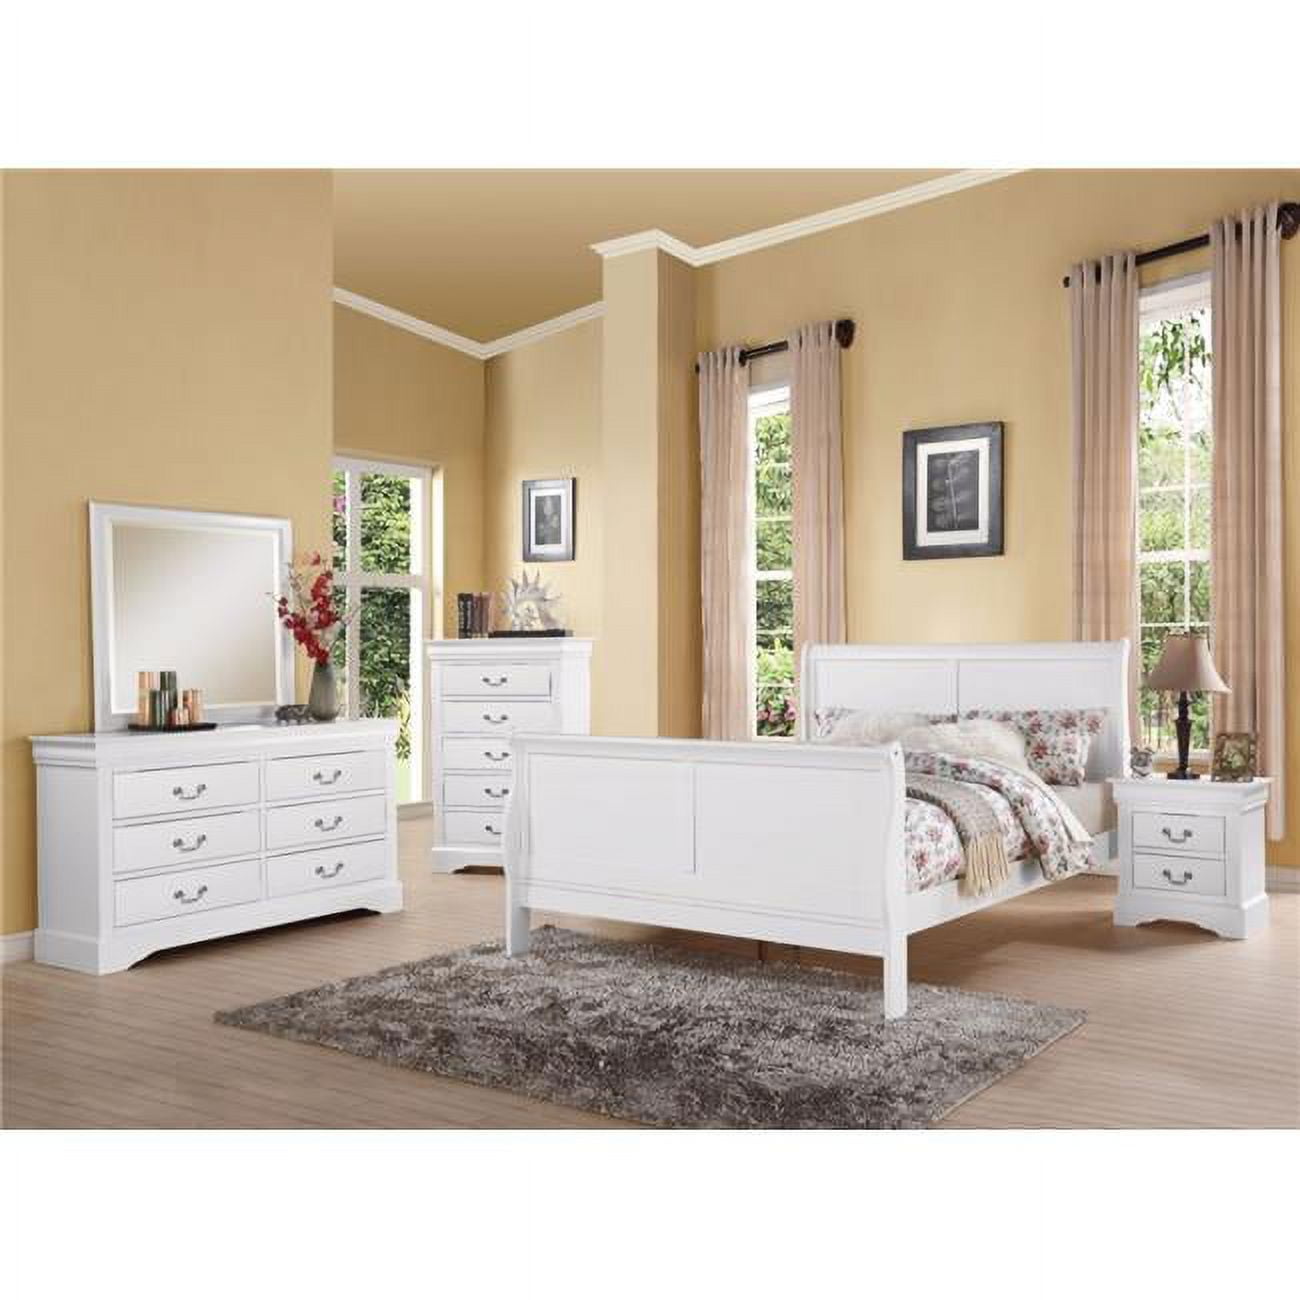 BM156016 47 x 63 x 92 in. Classy Transitional Style Queen Size Sleigh Bed, White -  Benzara